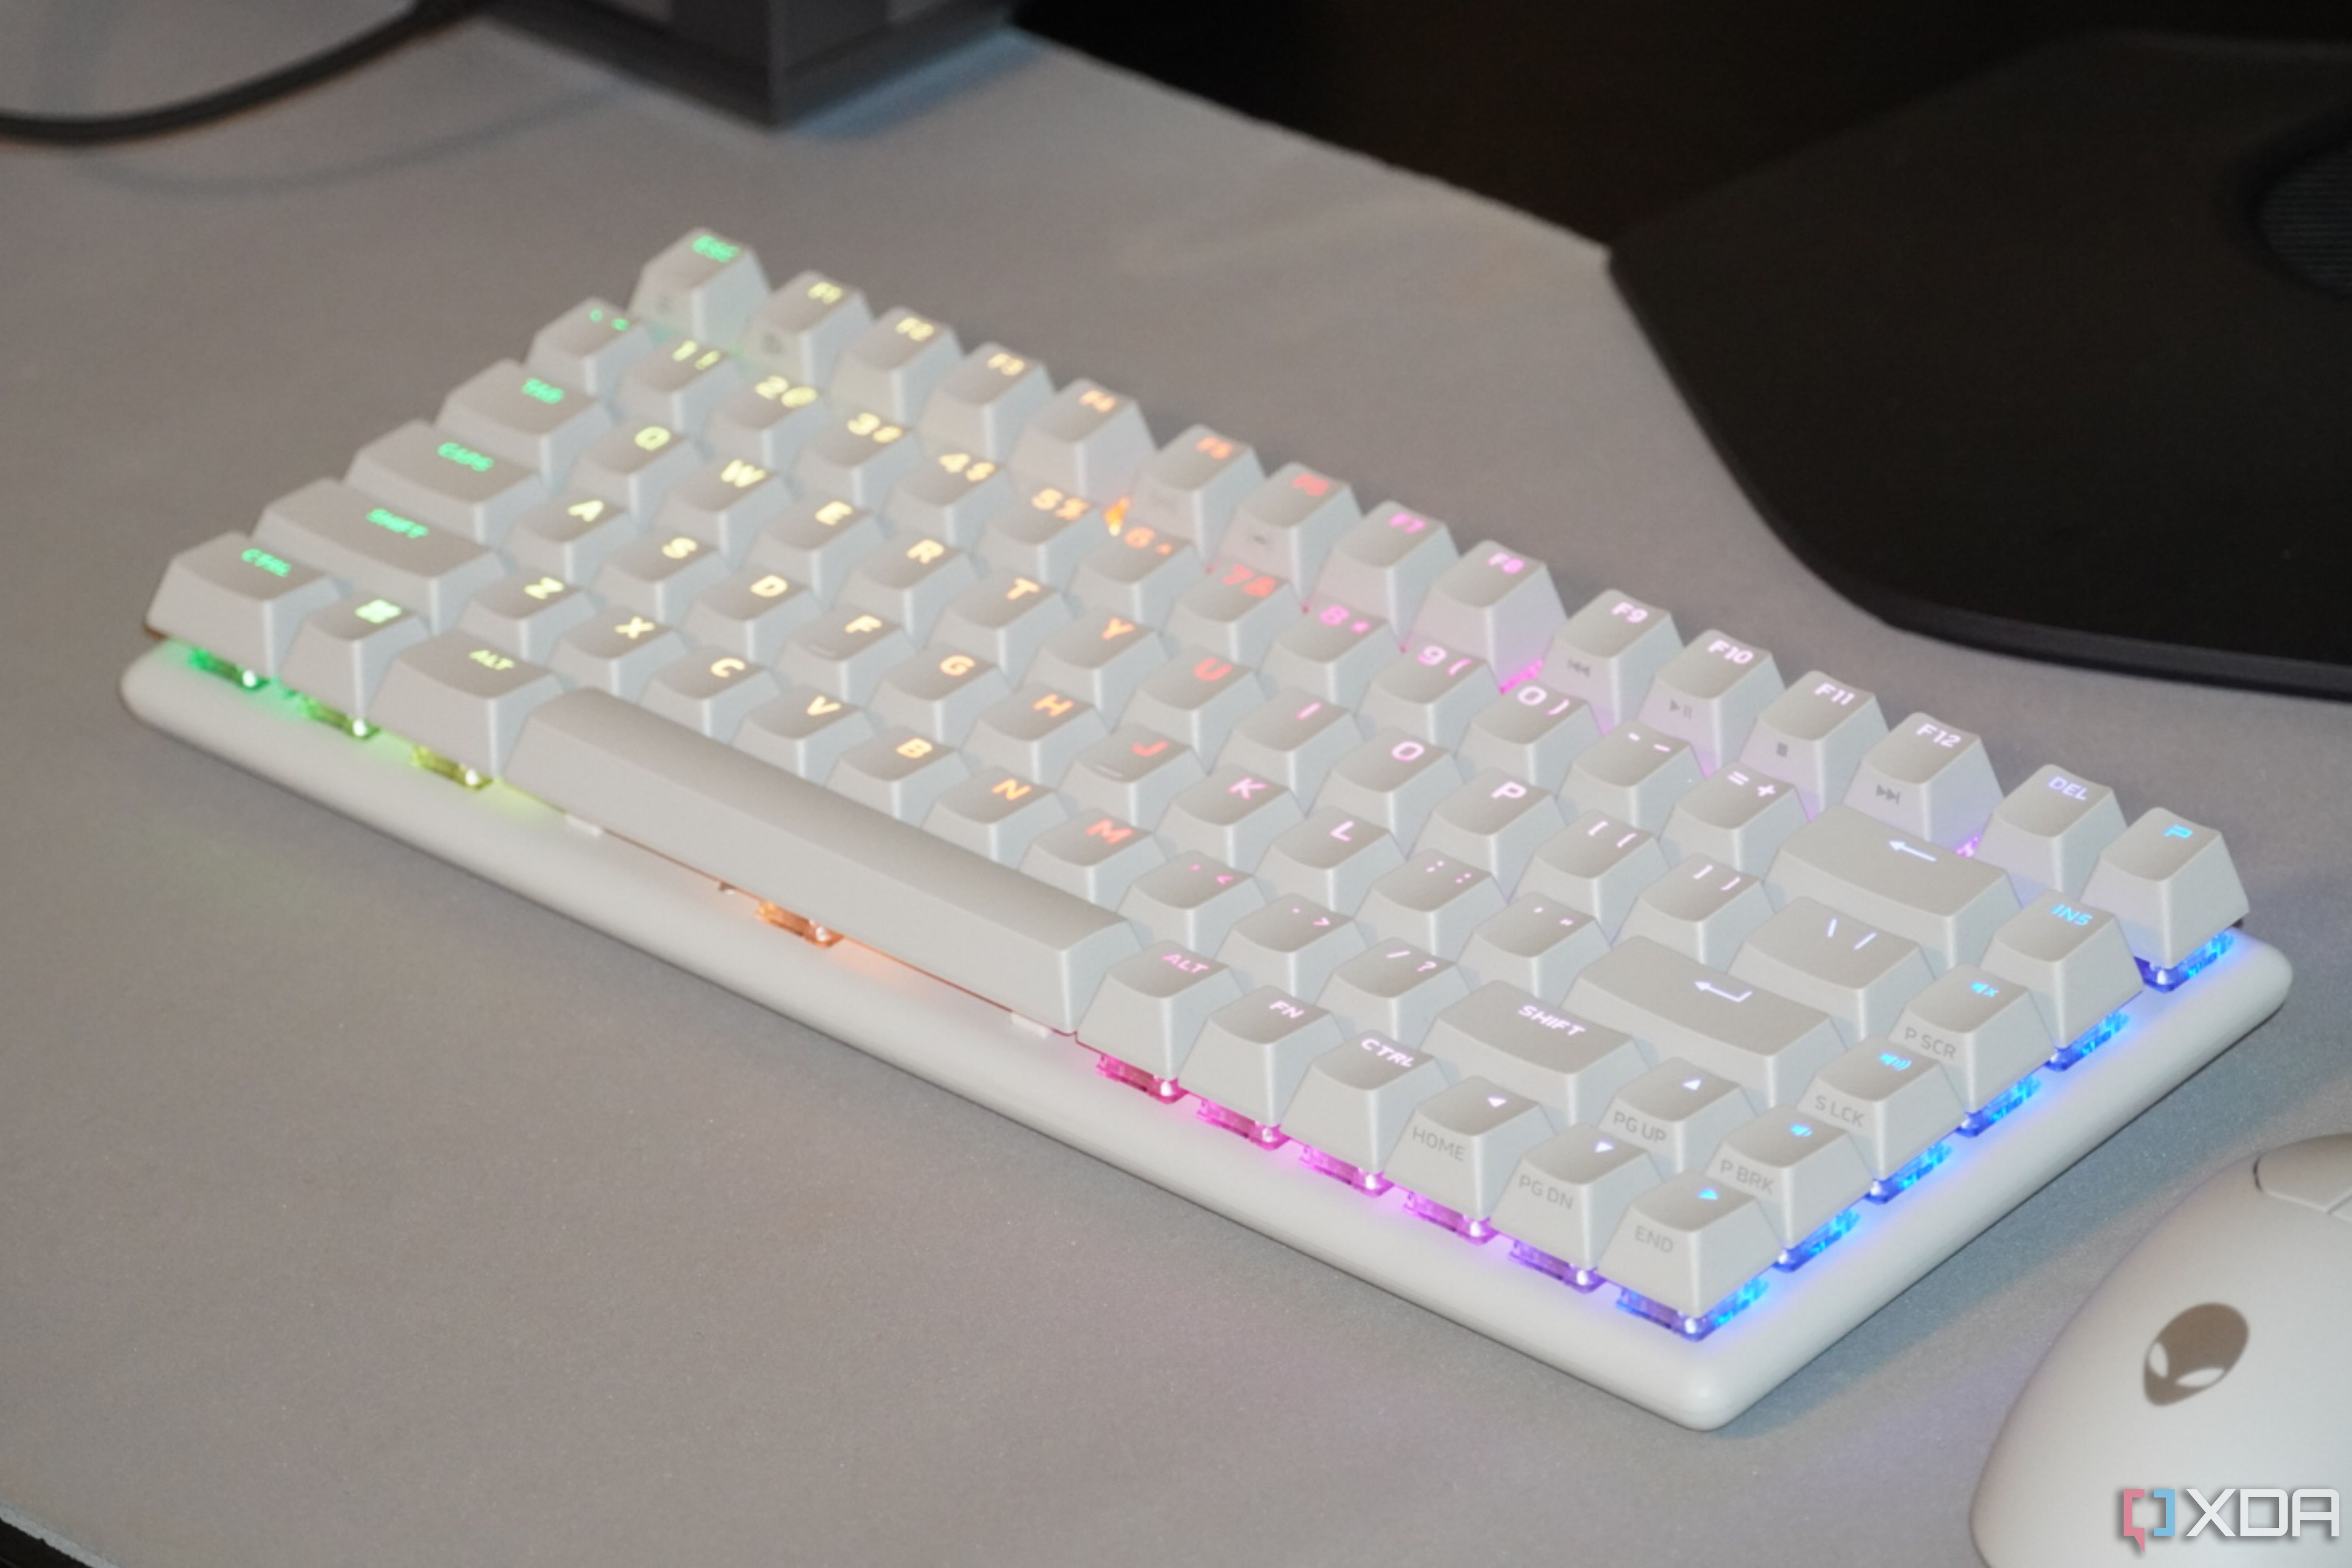 The Alienware Pro wireless keyboard on a desk with RGB lighting.